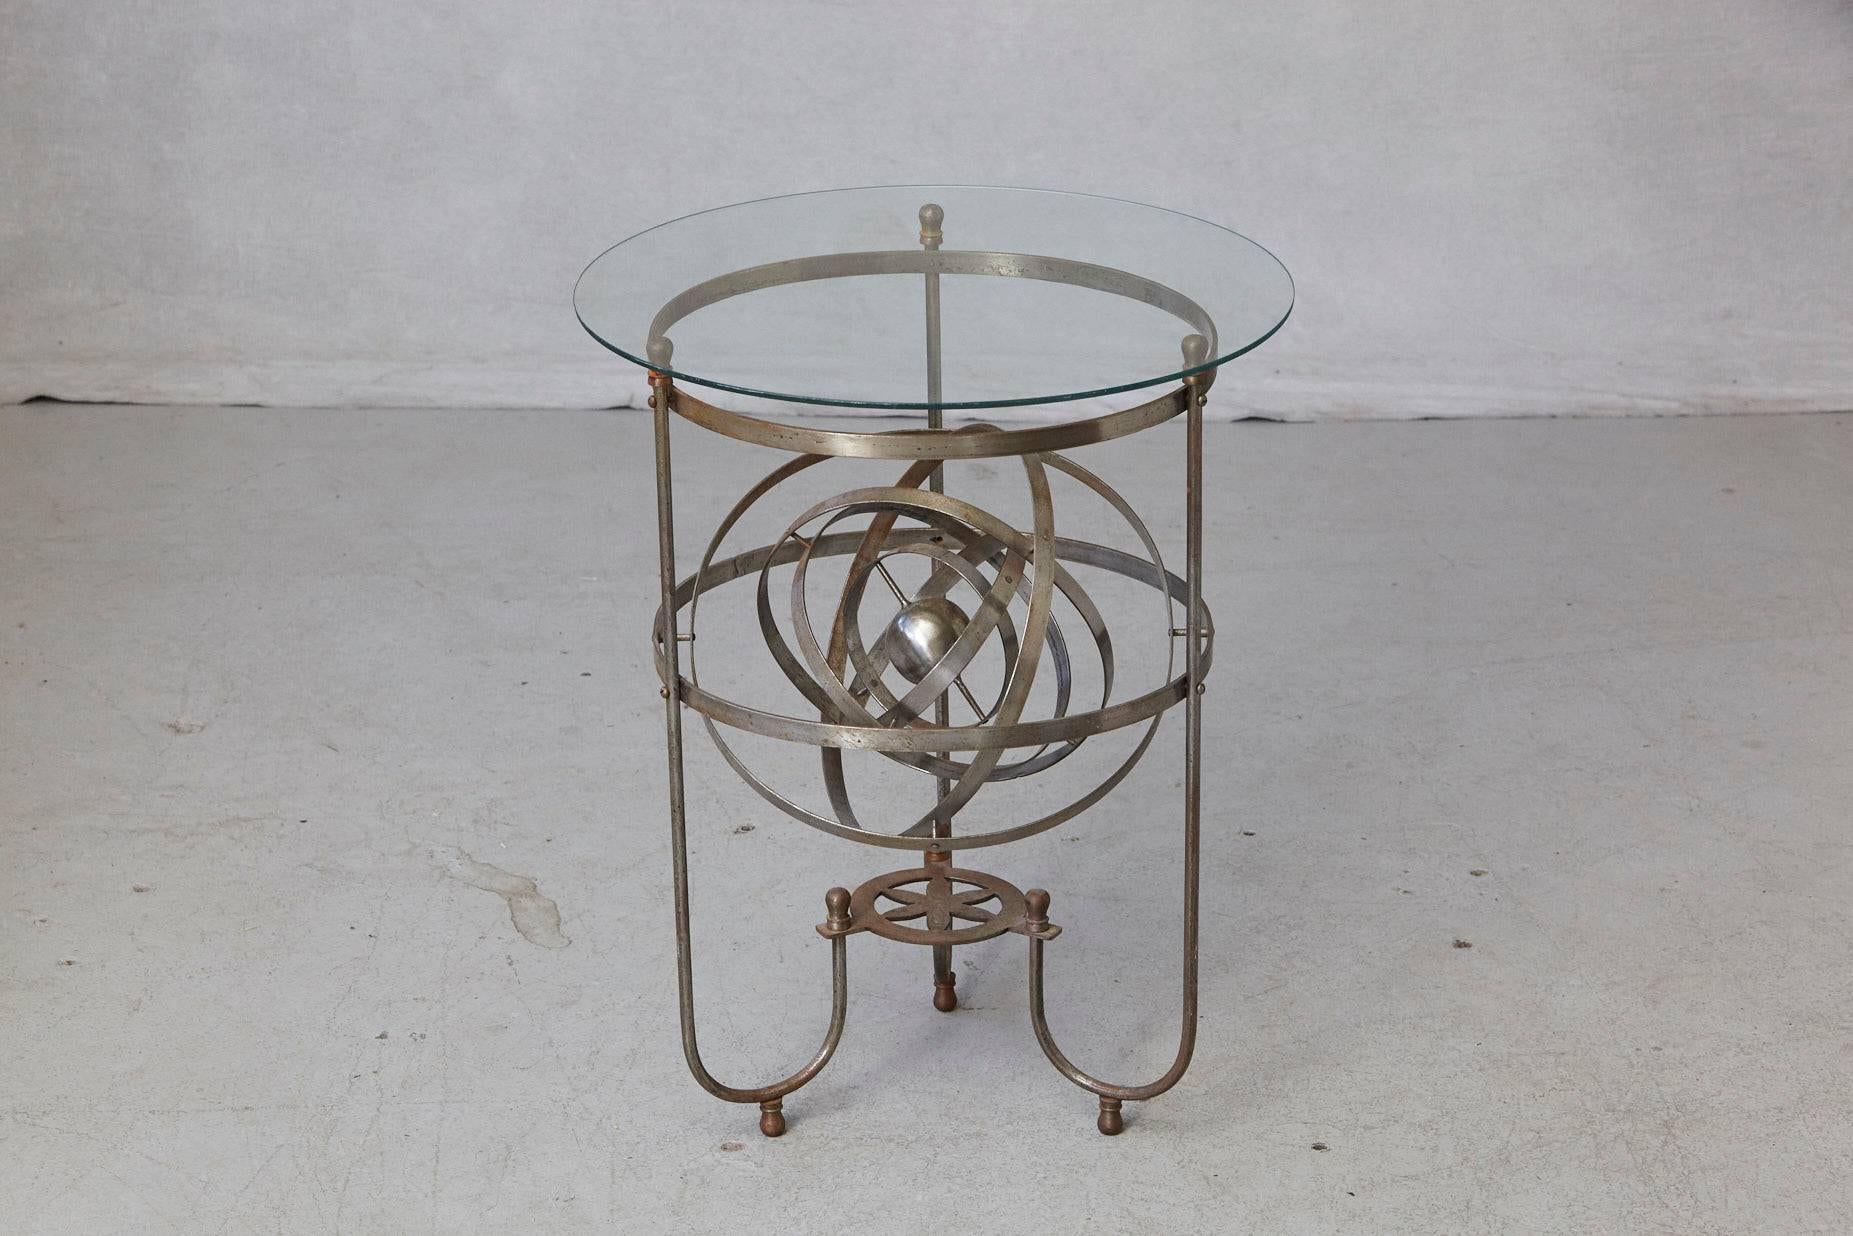 20th Century Rare Kinetic Side Table with Revolving Orbital Motion, England, 1930s